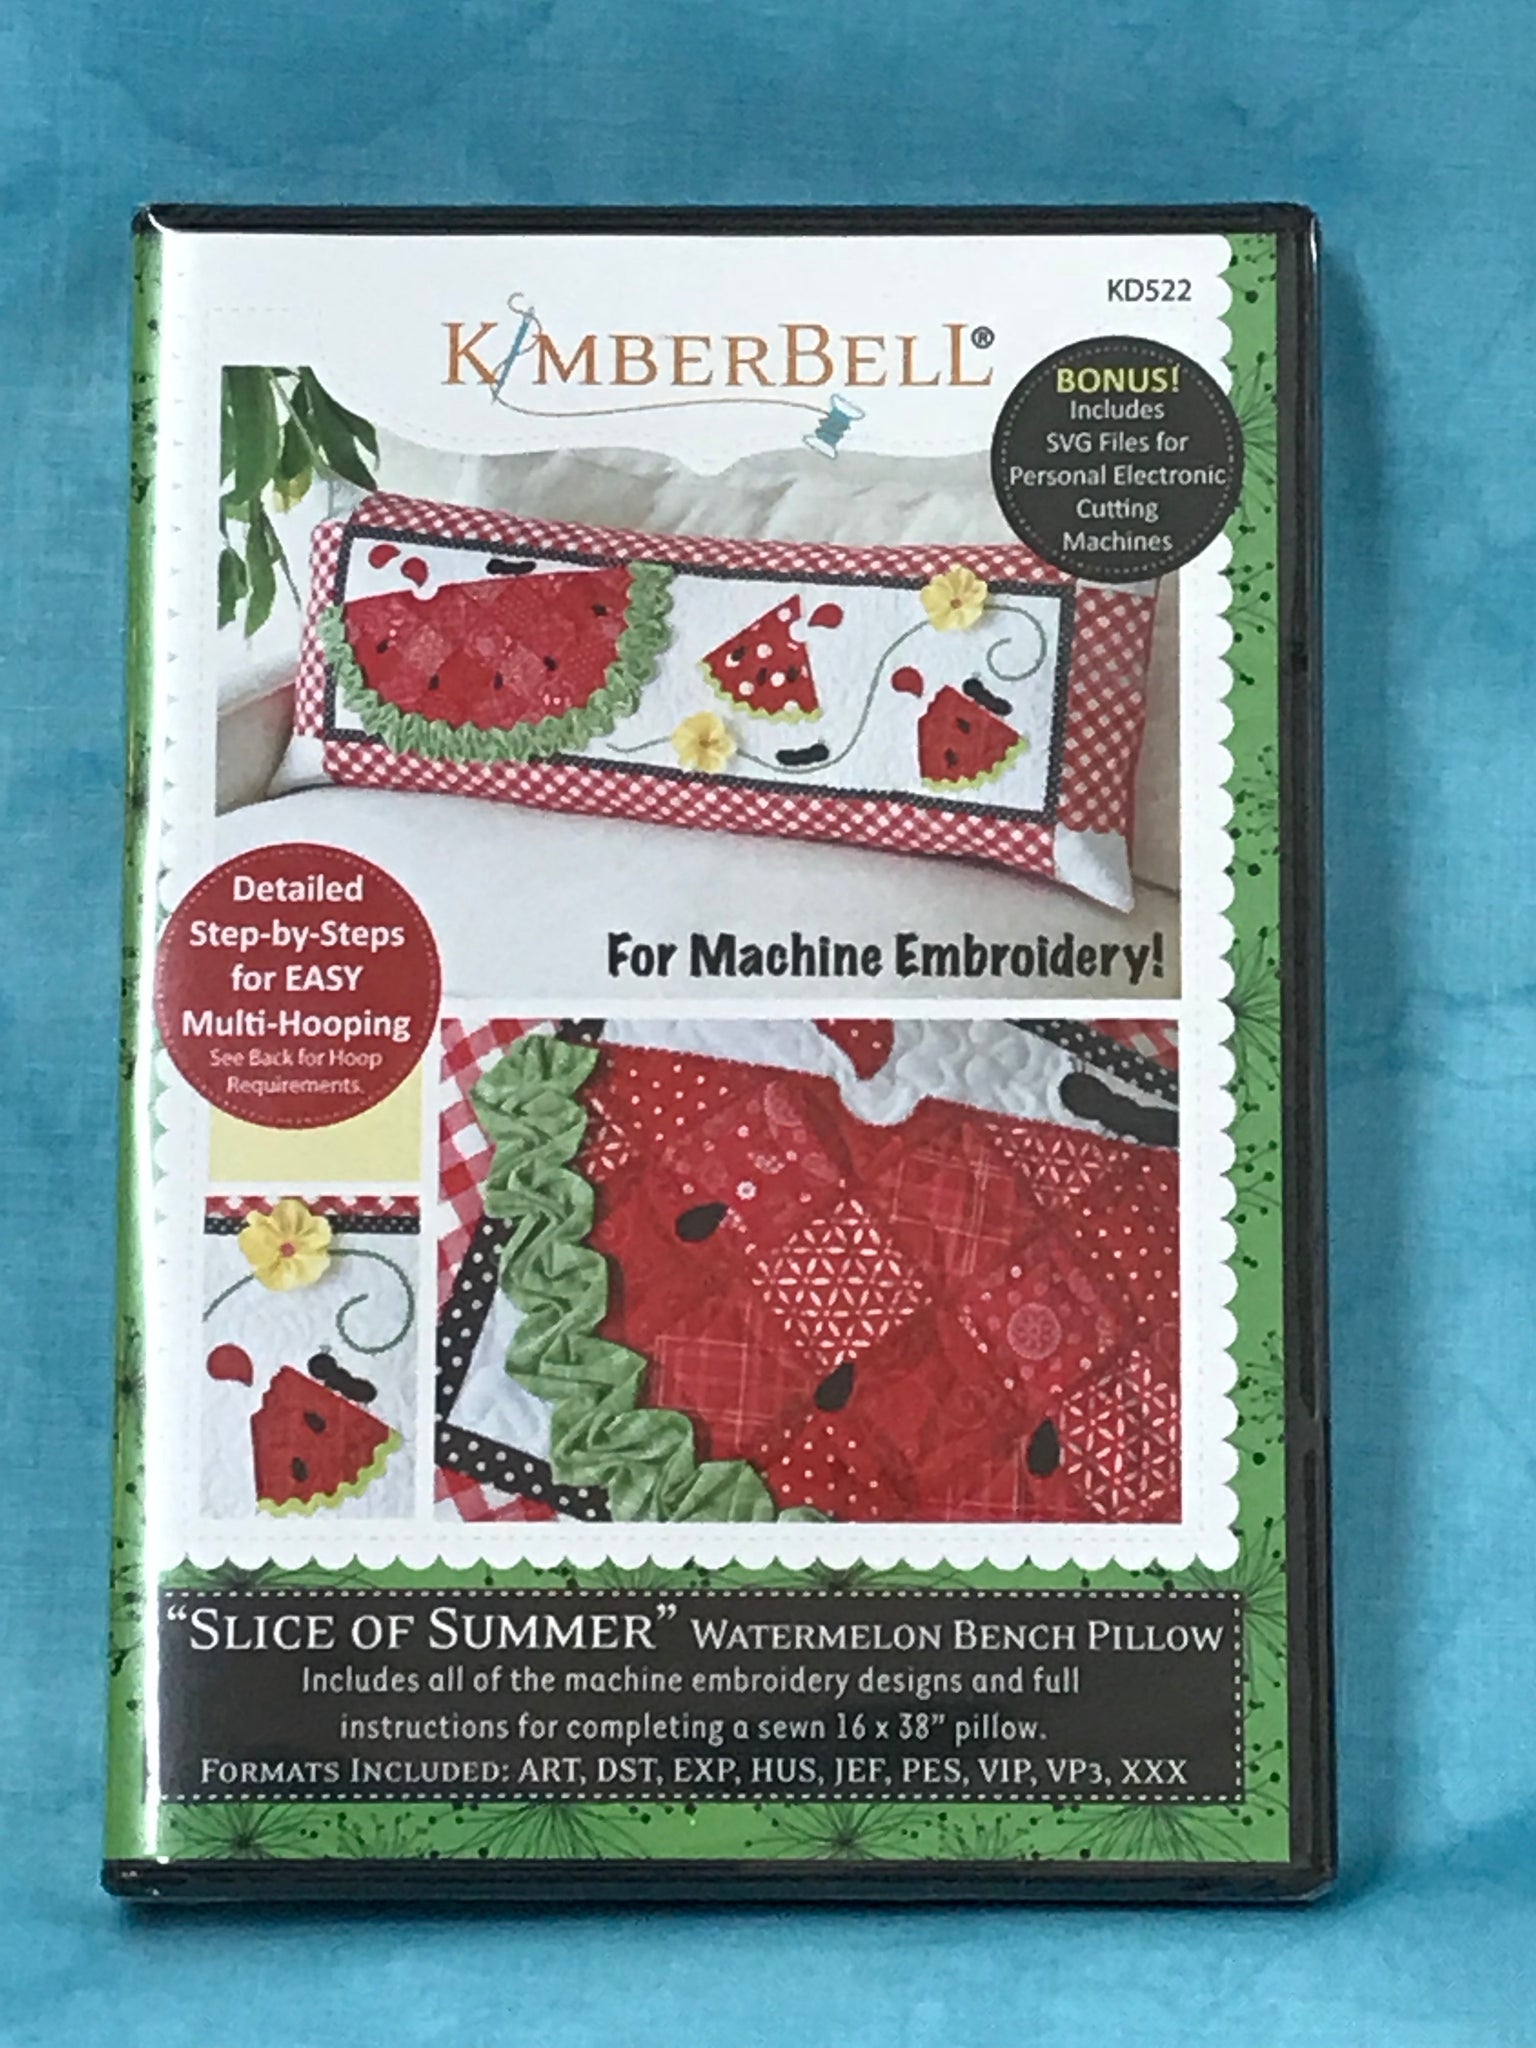 Machine Embroidery Products by Kimberbell Designs